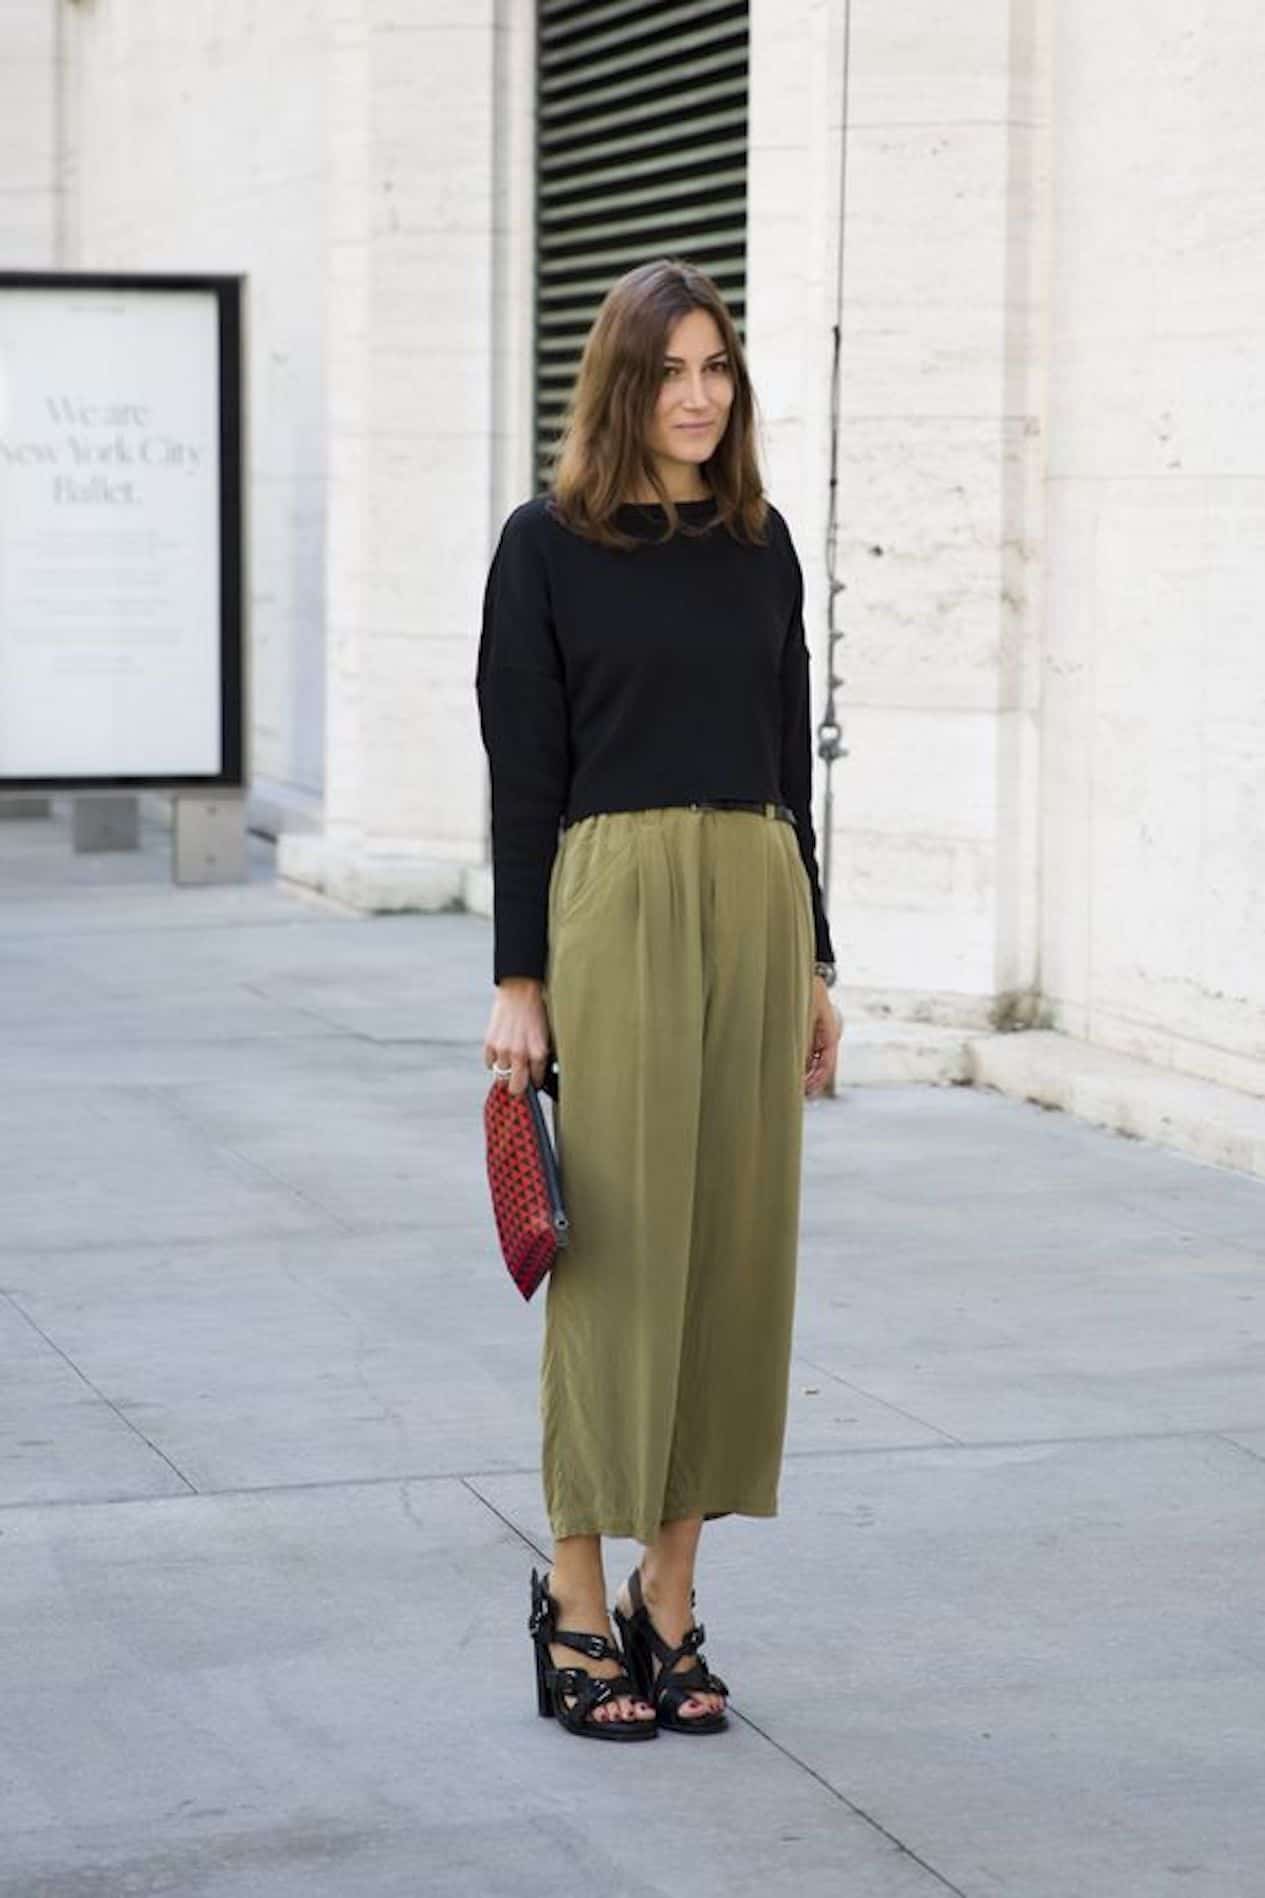 image of a woman standing on a sidewalk wearing green flowy pants, a black sweater, and black sandal heels